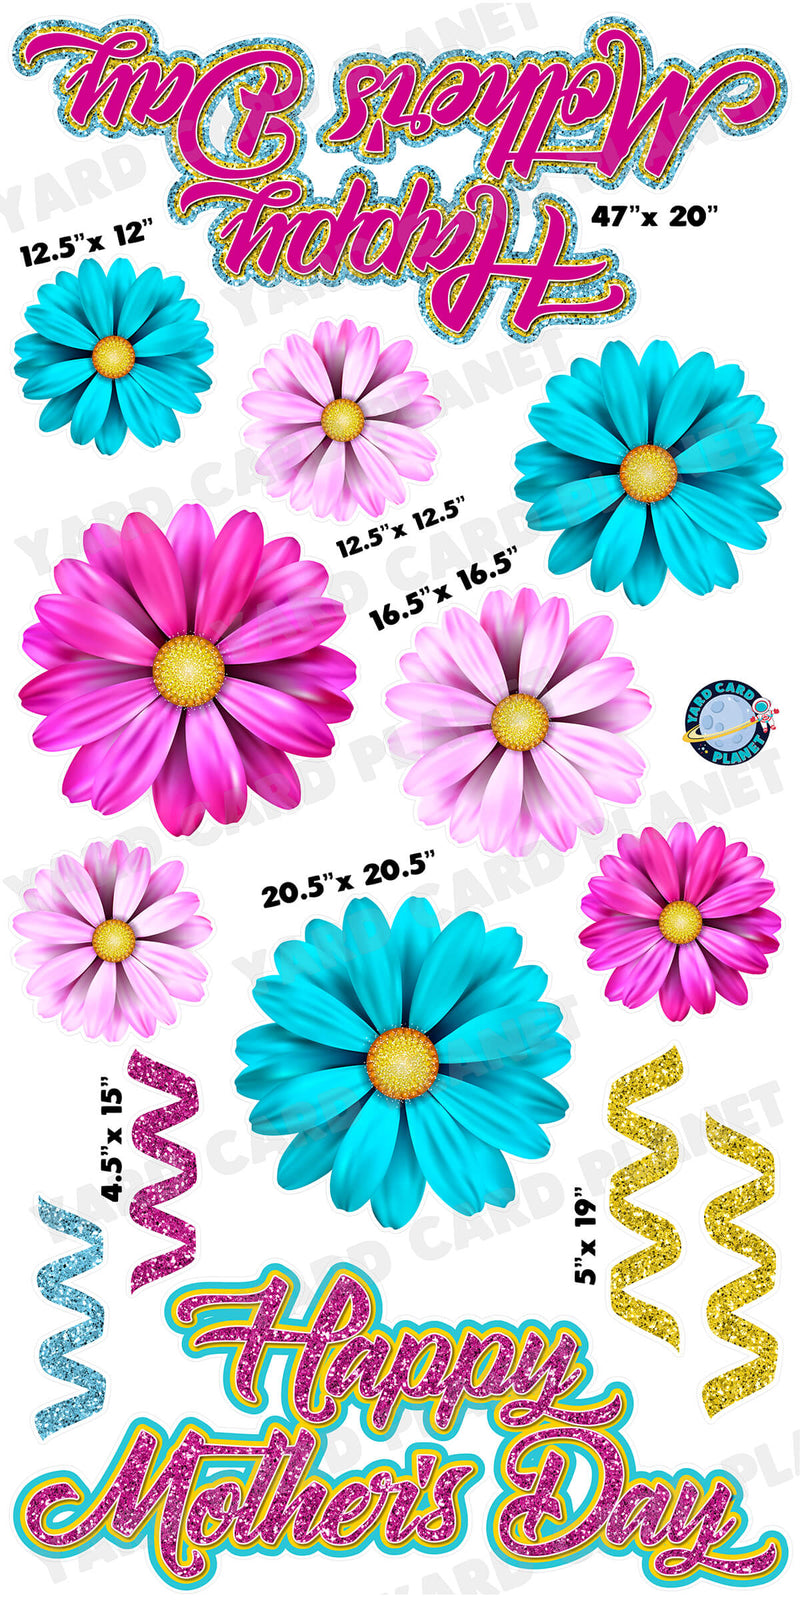 Happy Mother's Day EZ Quick Signs and Daisies Yard Card Flair Set